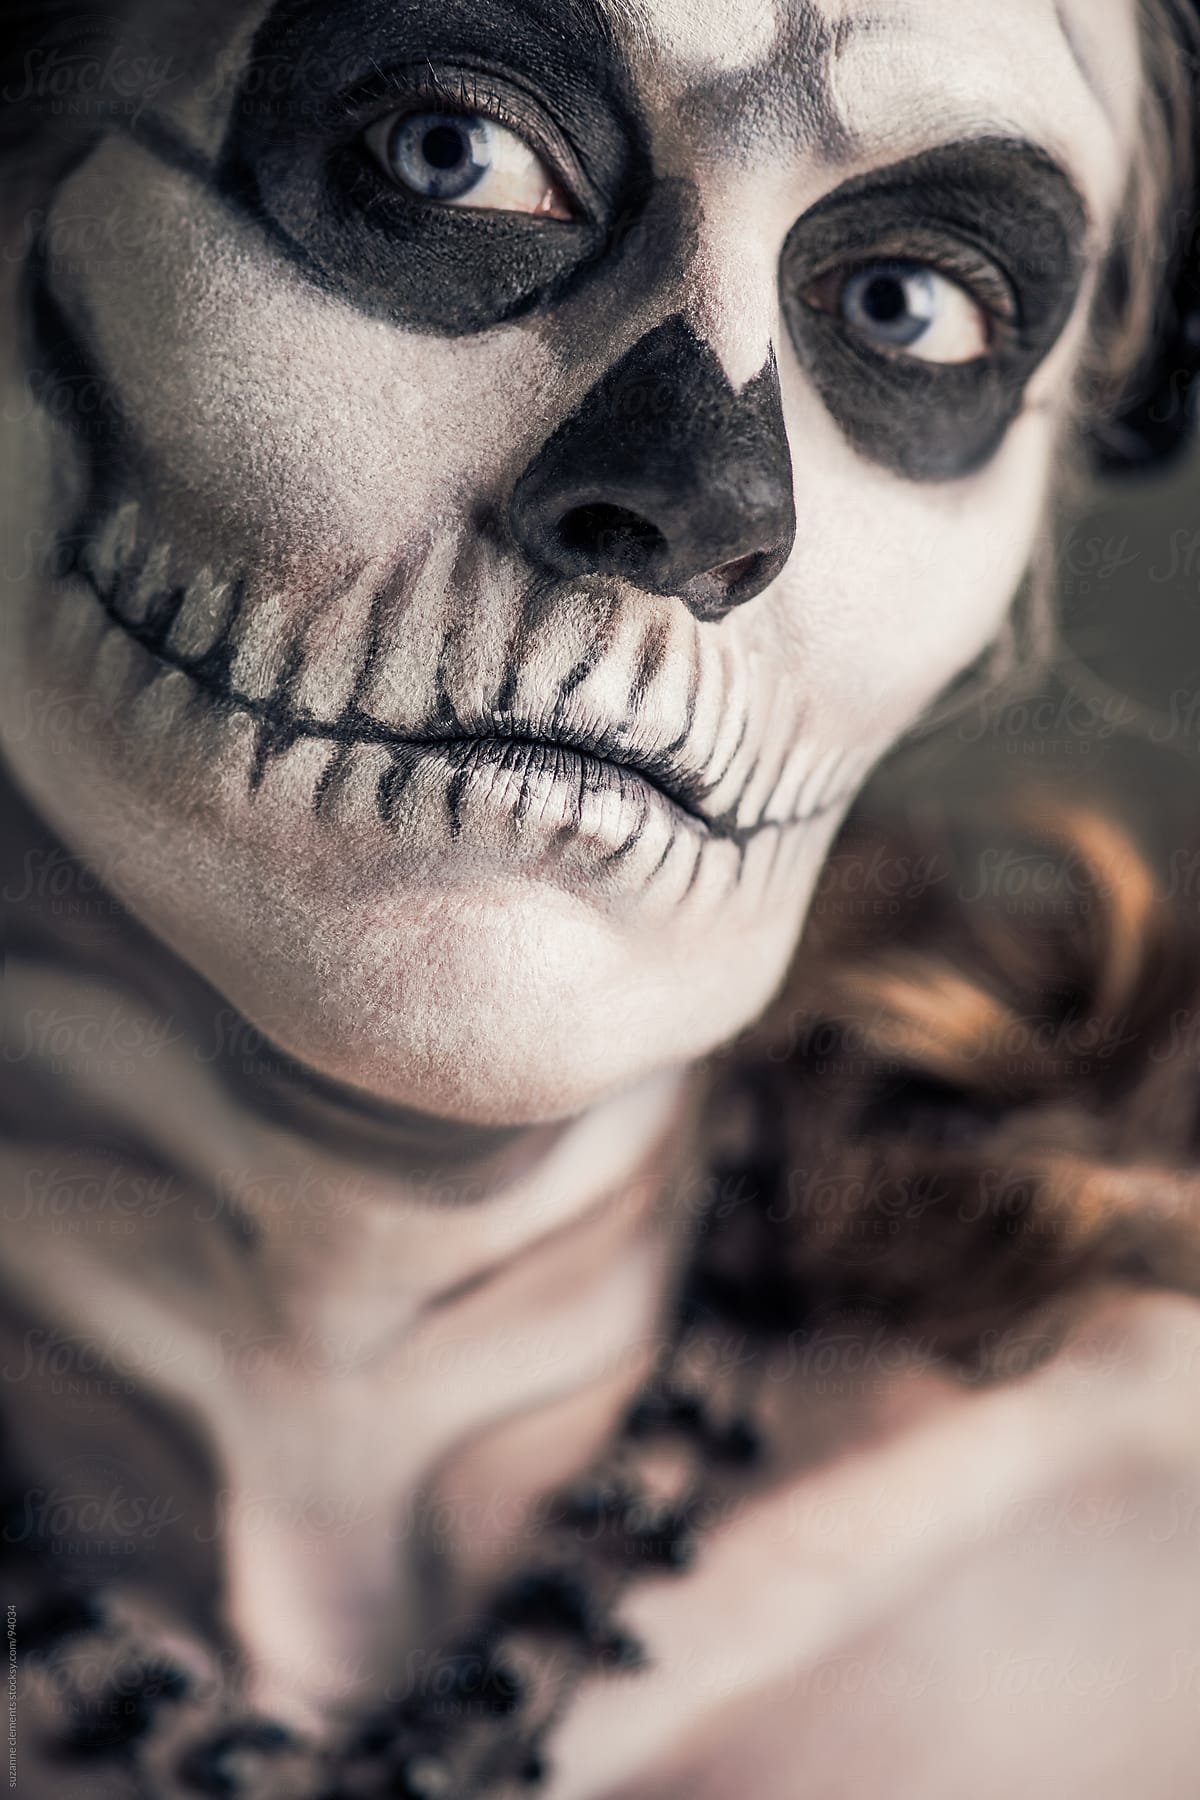 Woman Painted as a Frightening Skeleton